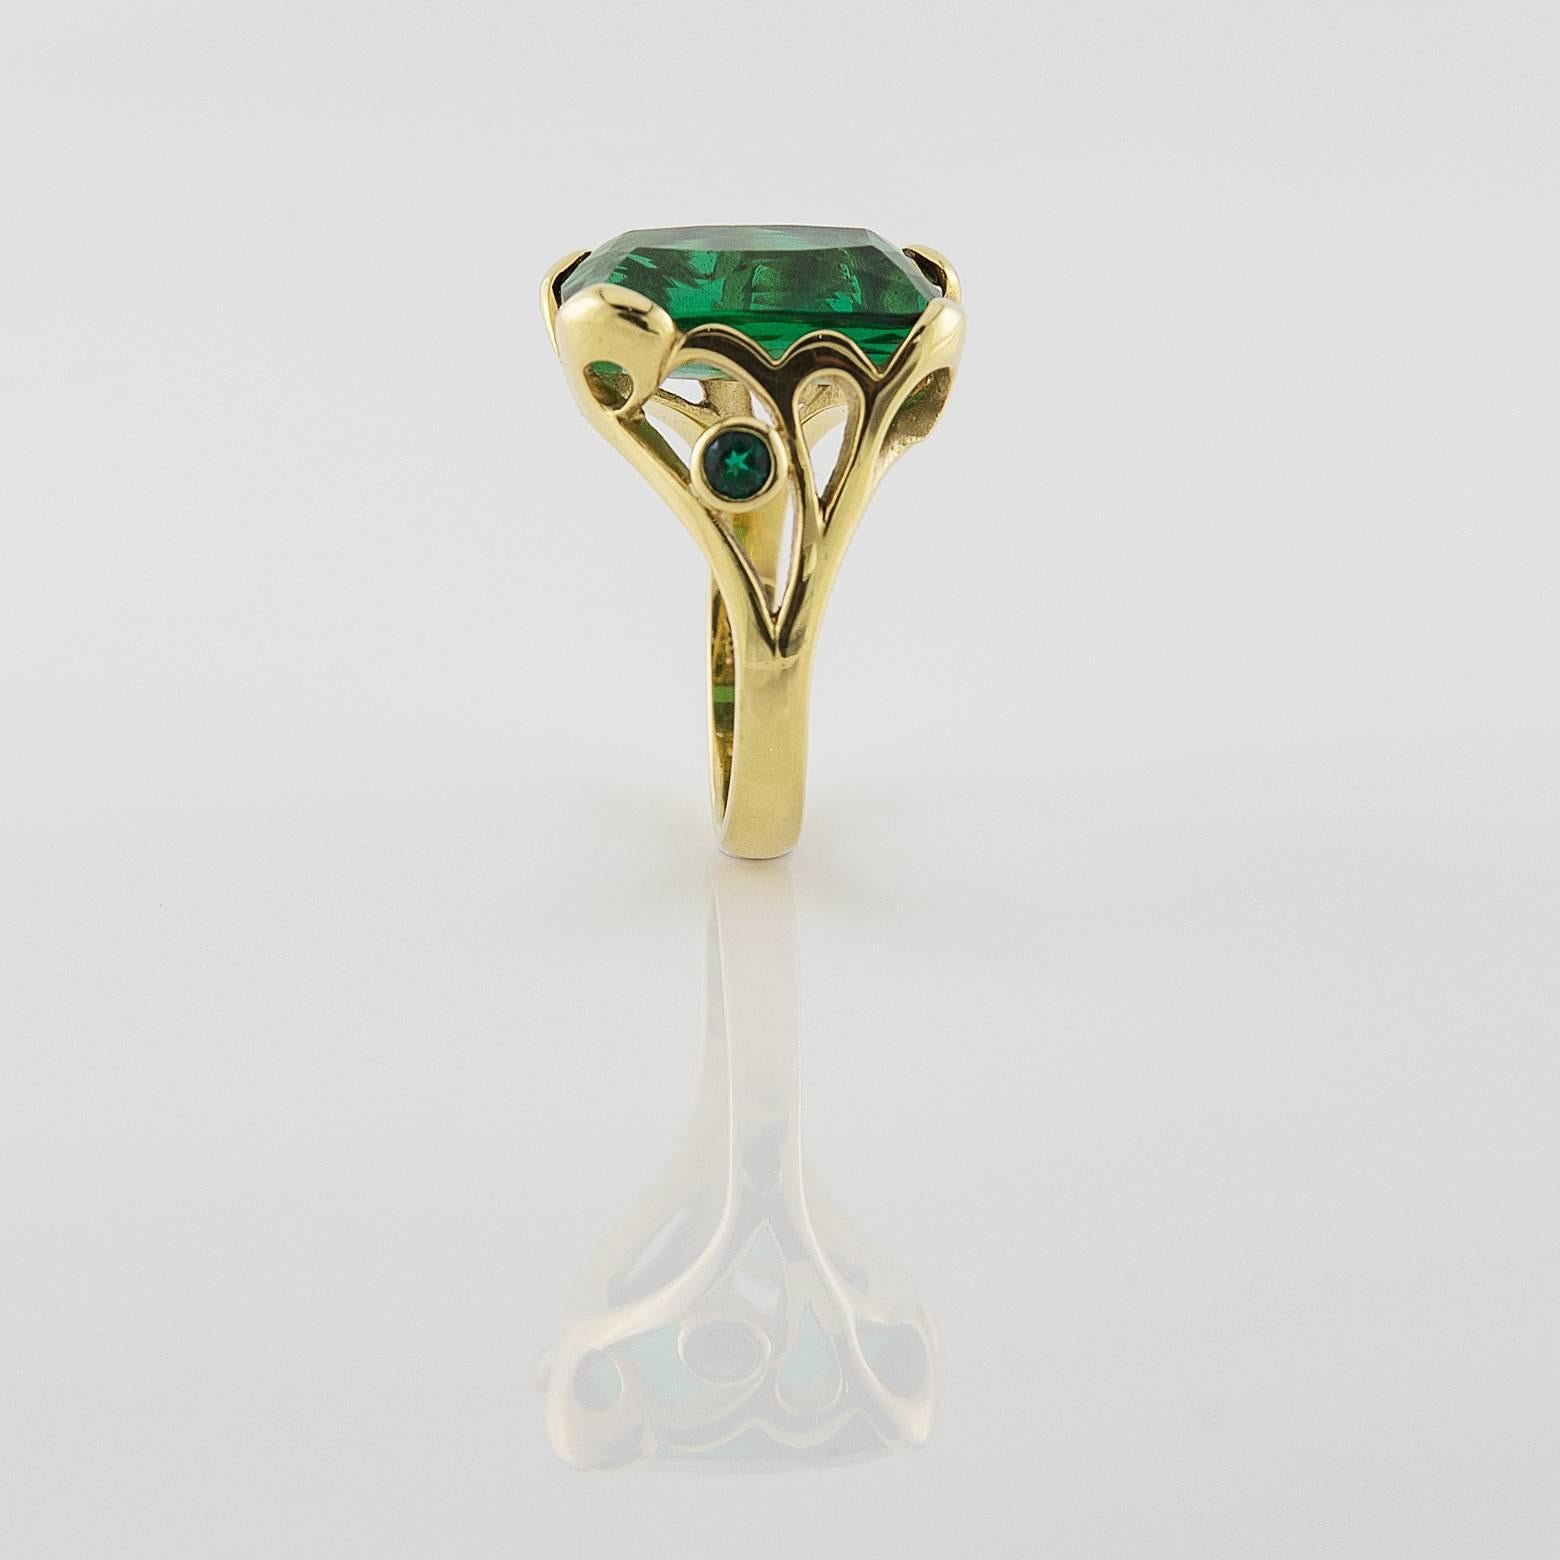 This deep green emerald-cut tourmaline ring is absolutely divine. The unique free form bezel shows artistic class and is decorated with 2 small green tourmalines on the side. The perfection of this stone gives it added glamour and  insatiable taste.